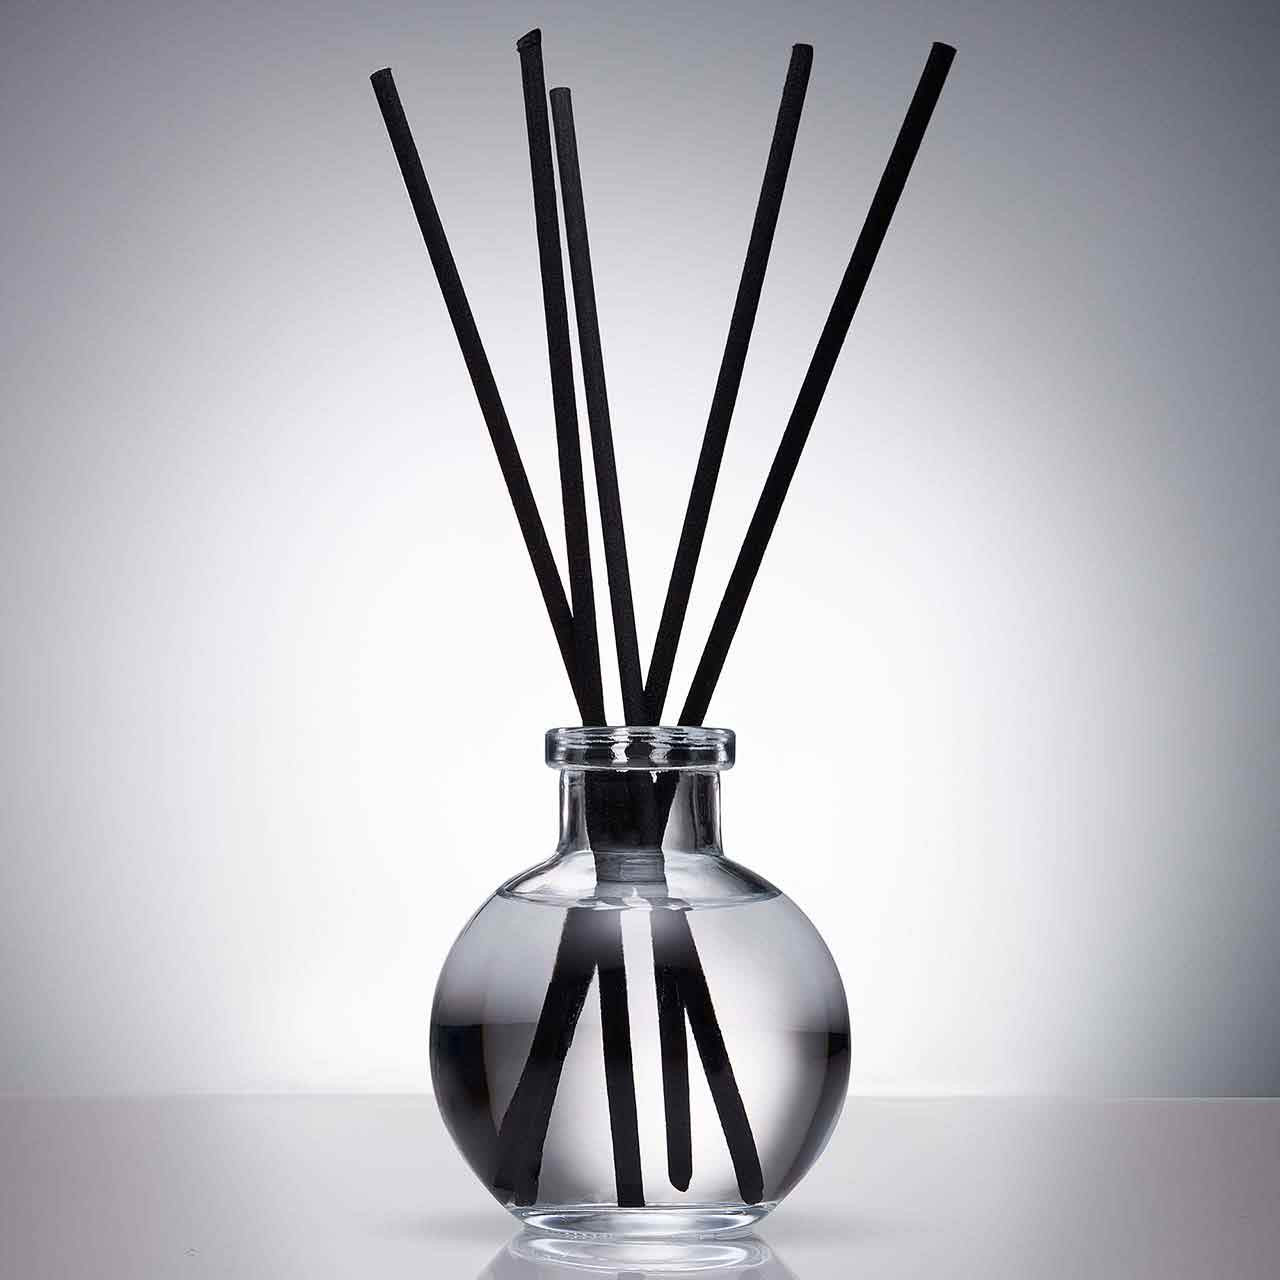 https://cdn11.bigcommerce.com/s-uzavep2g8k/images/stencil/1280x1280/products/858/3592/6545-Ball-Glass-Bottle-Reed-Diffuser__72299.1704377119.jpg?c=1